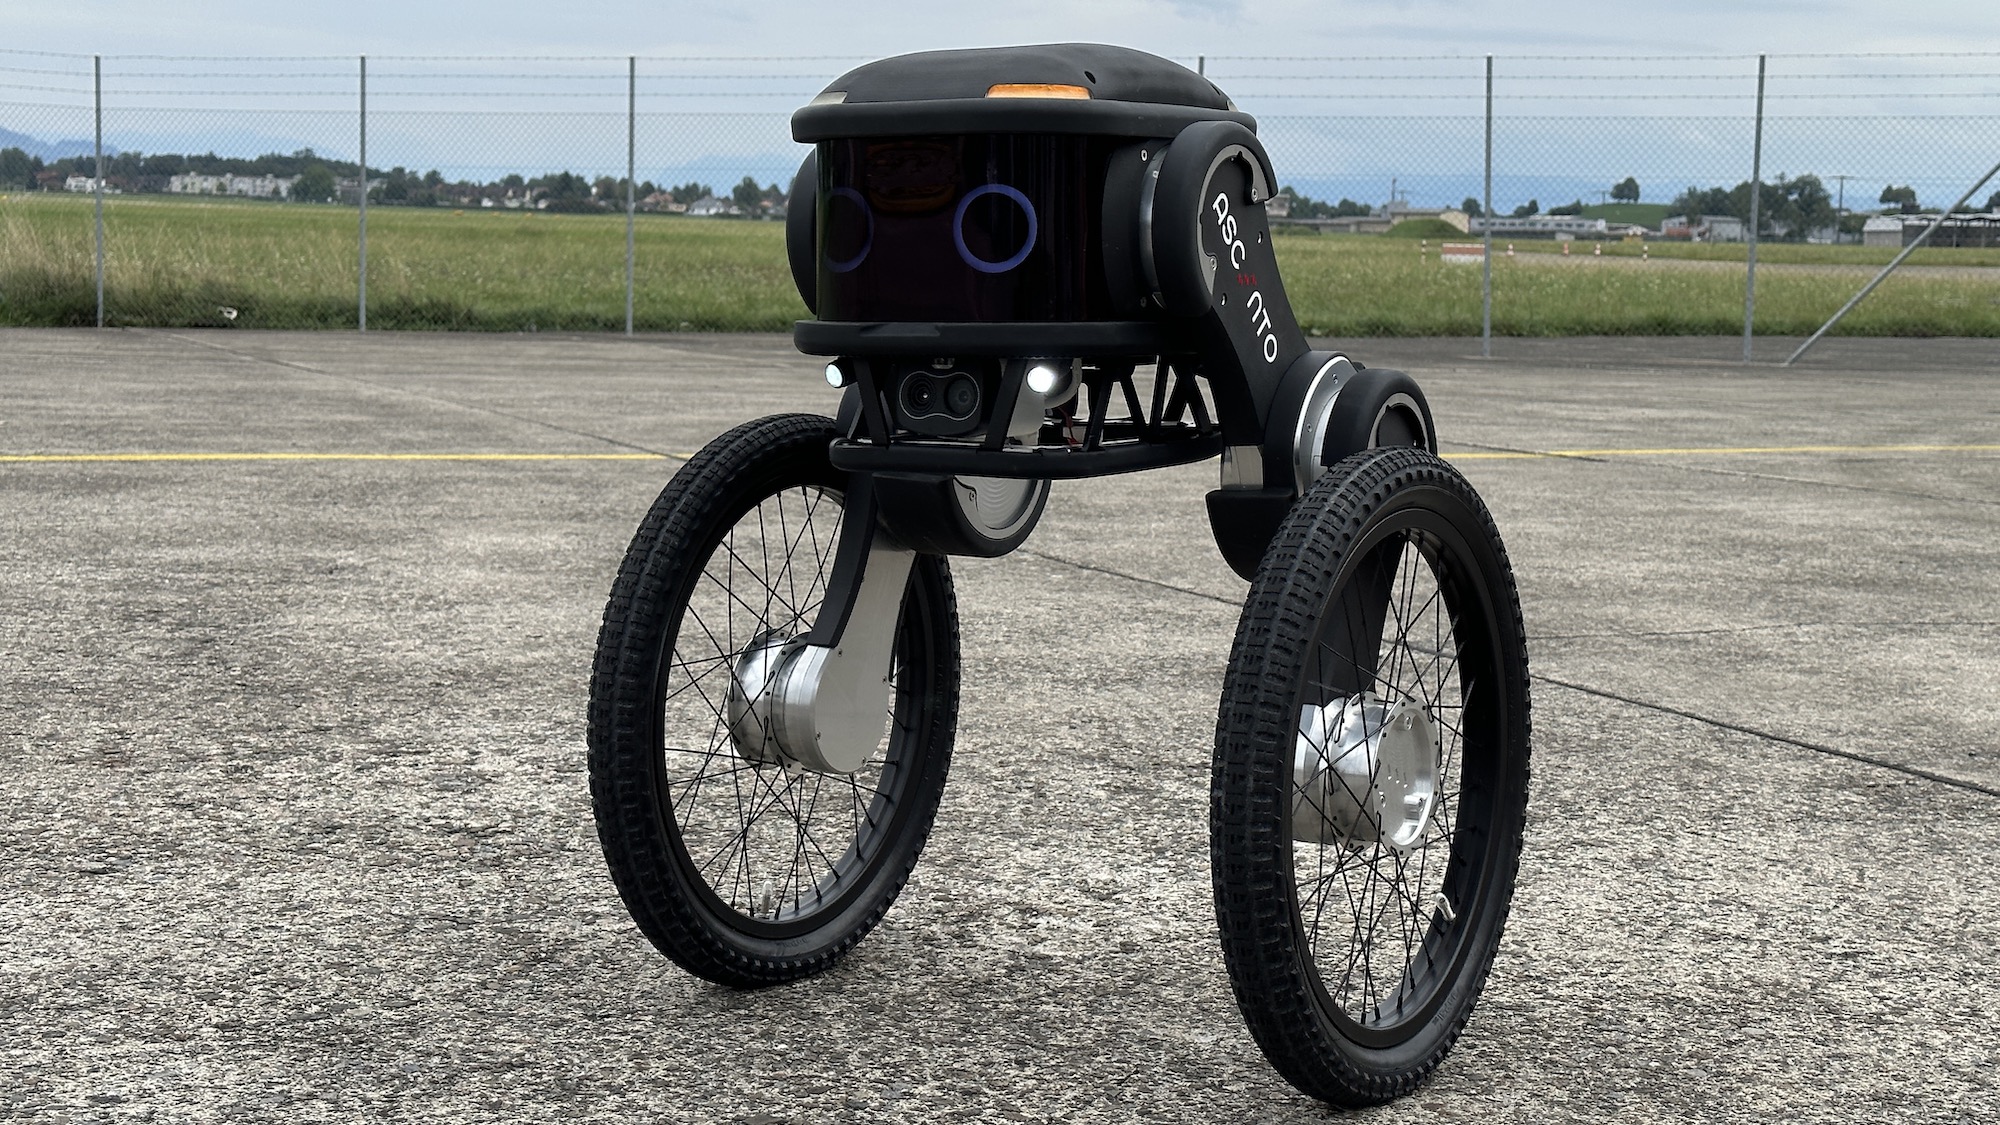 The Ascento Guard patrol robot puts a cartoonish spin on security enforcement